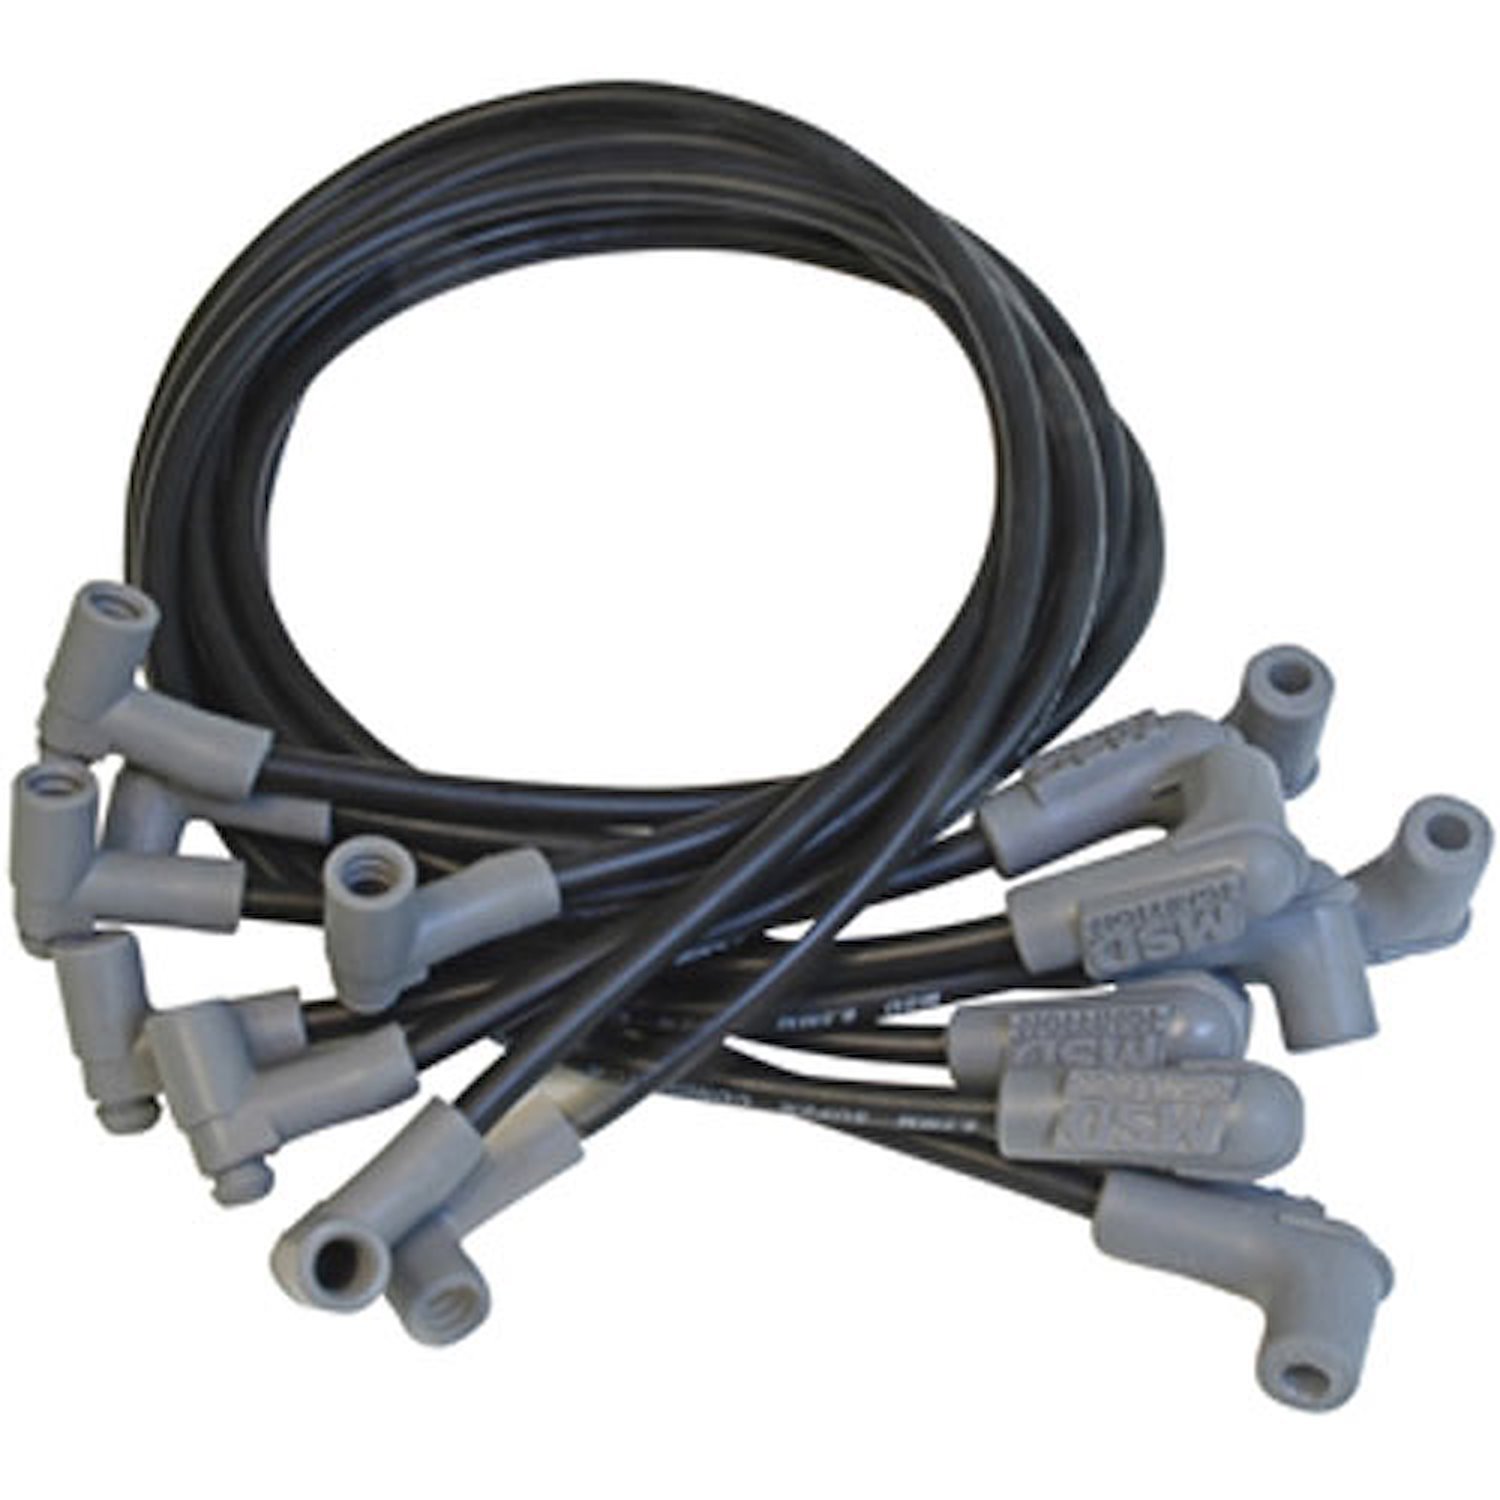 Super Conductor 8.5mm Wires Black